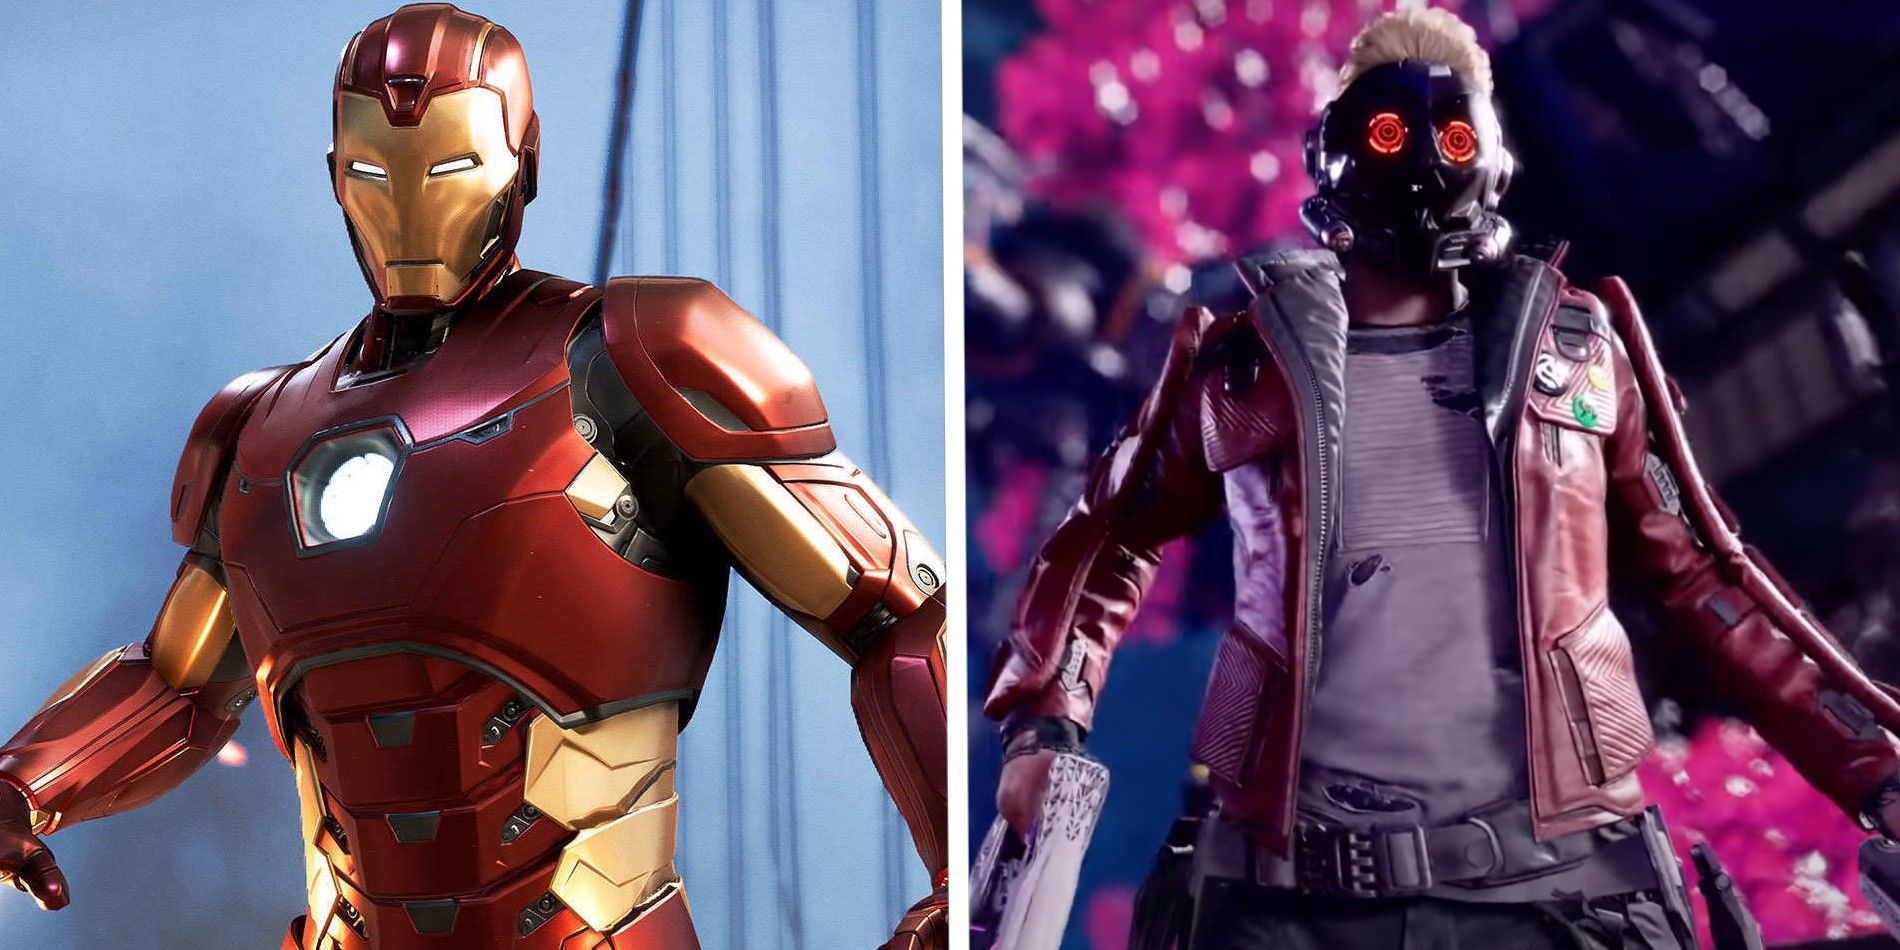 Iron Man and Star-Lord stand together